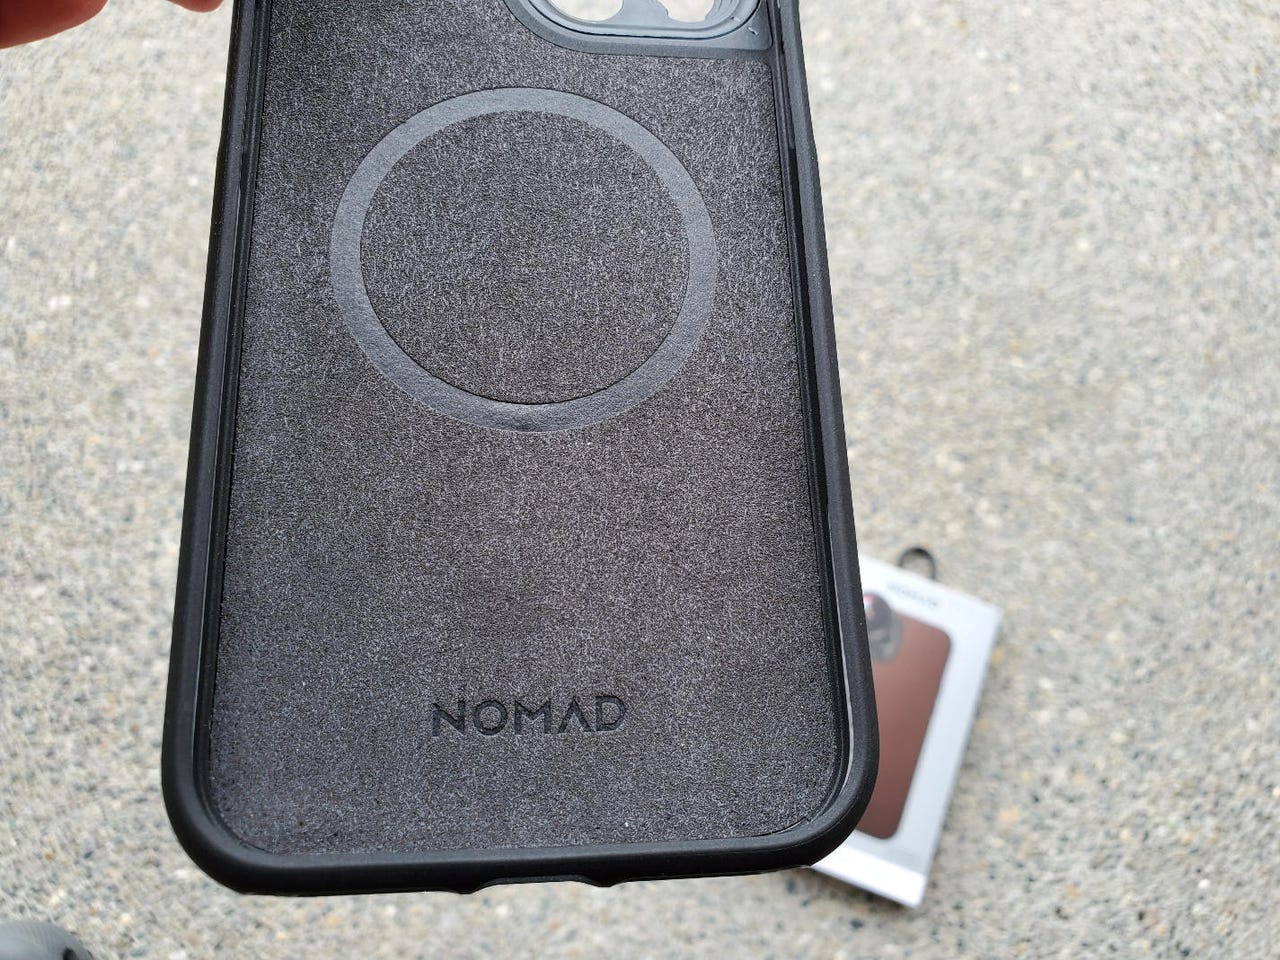 nomad-moment-iphone-12pm-3.jpg